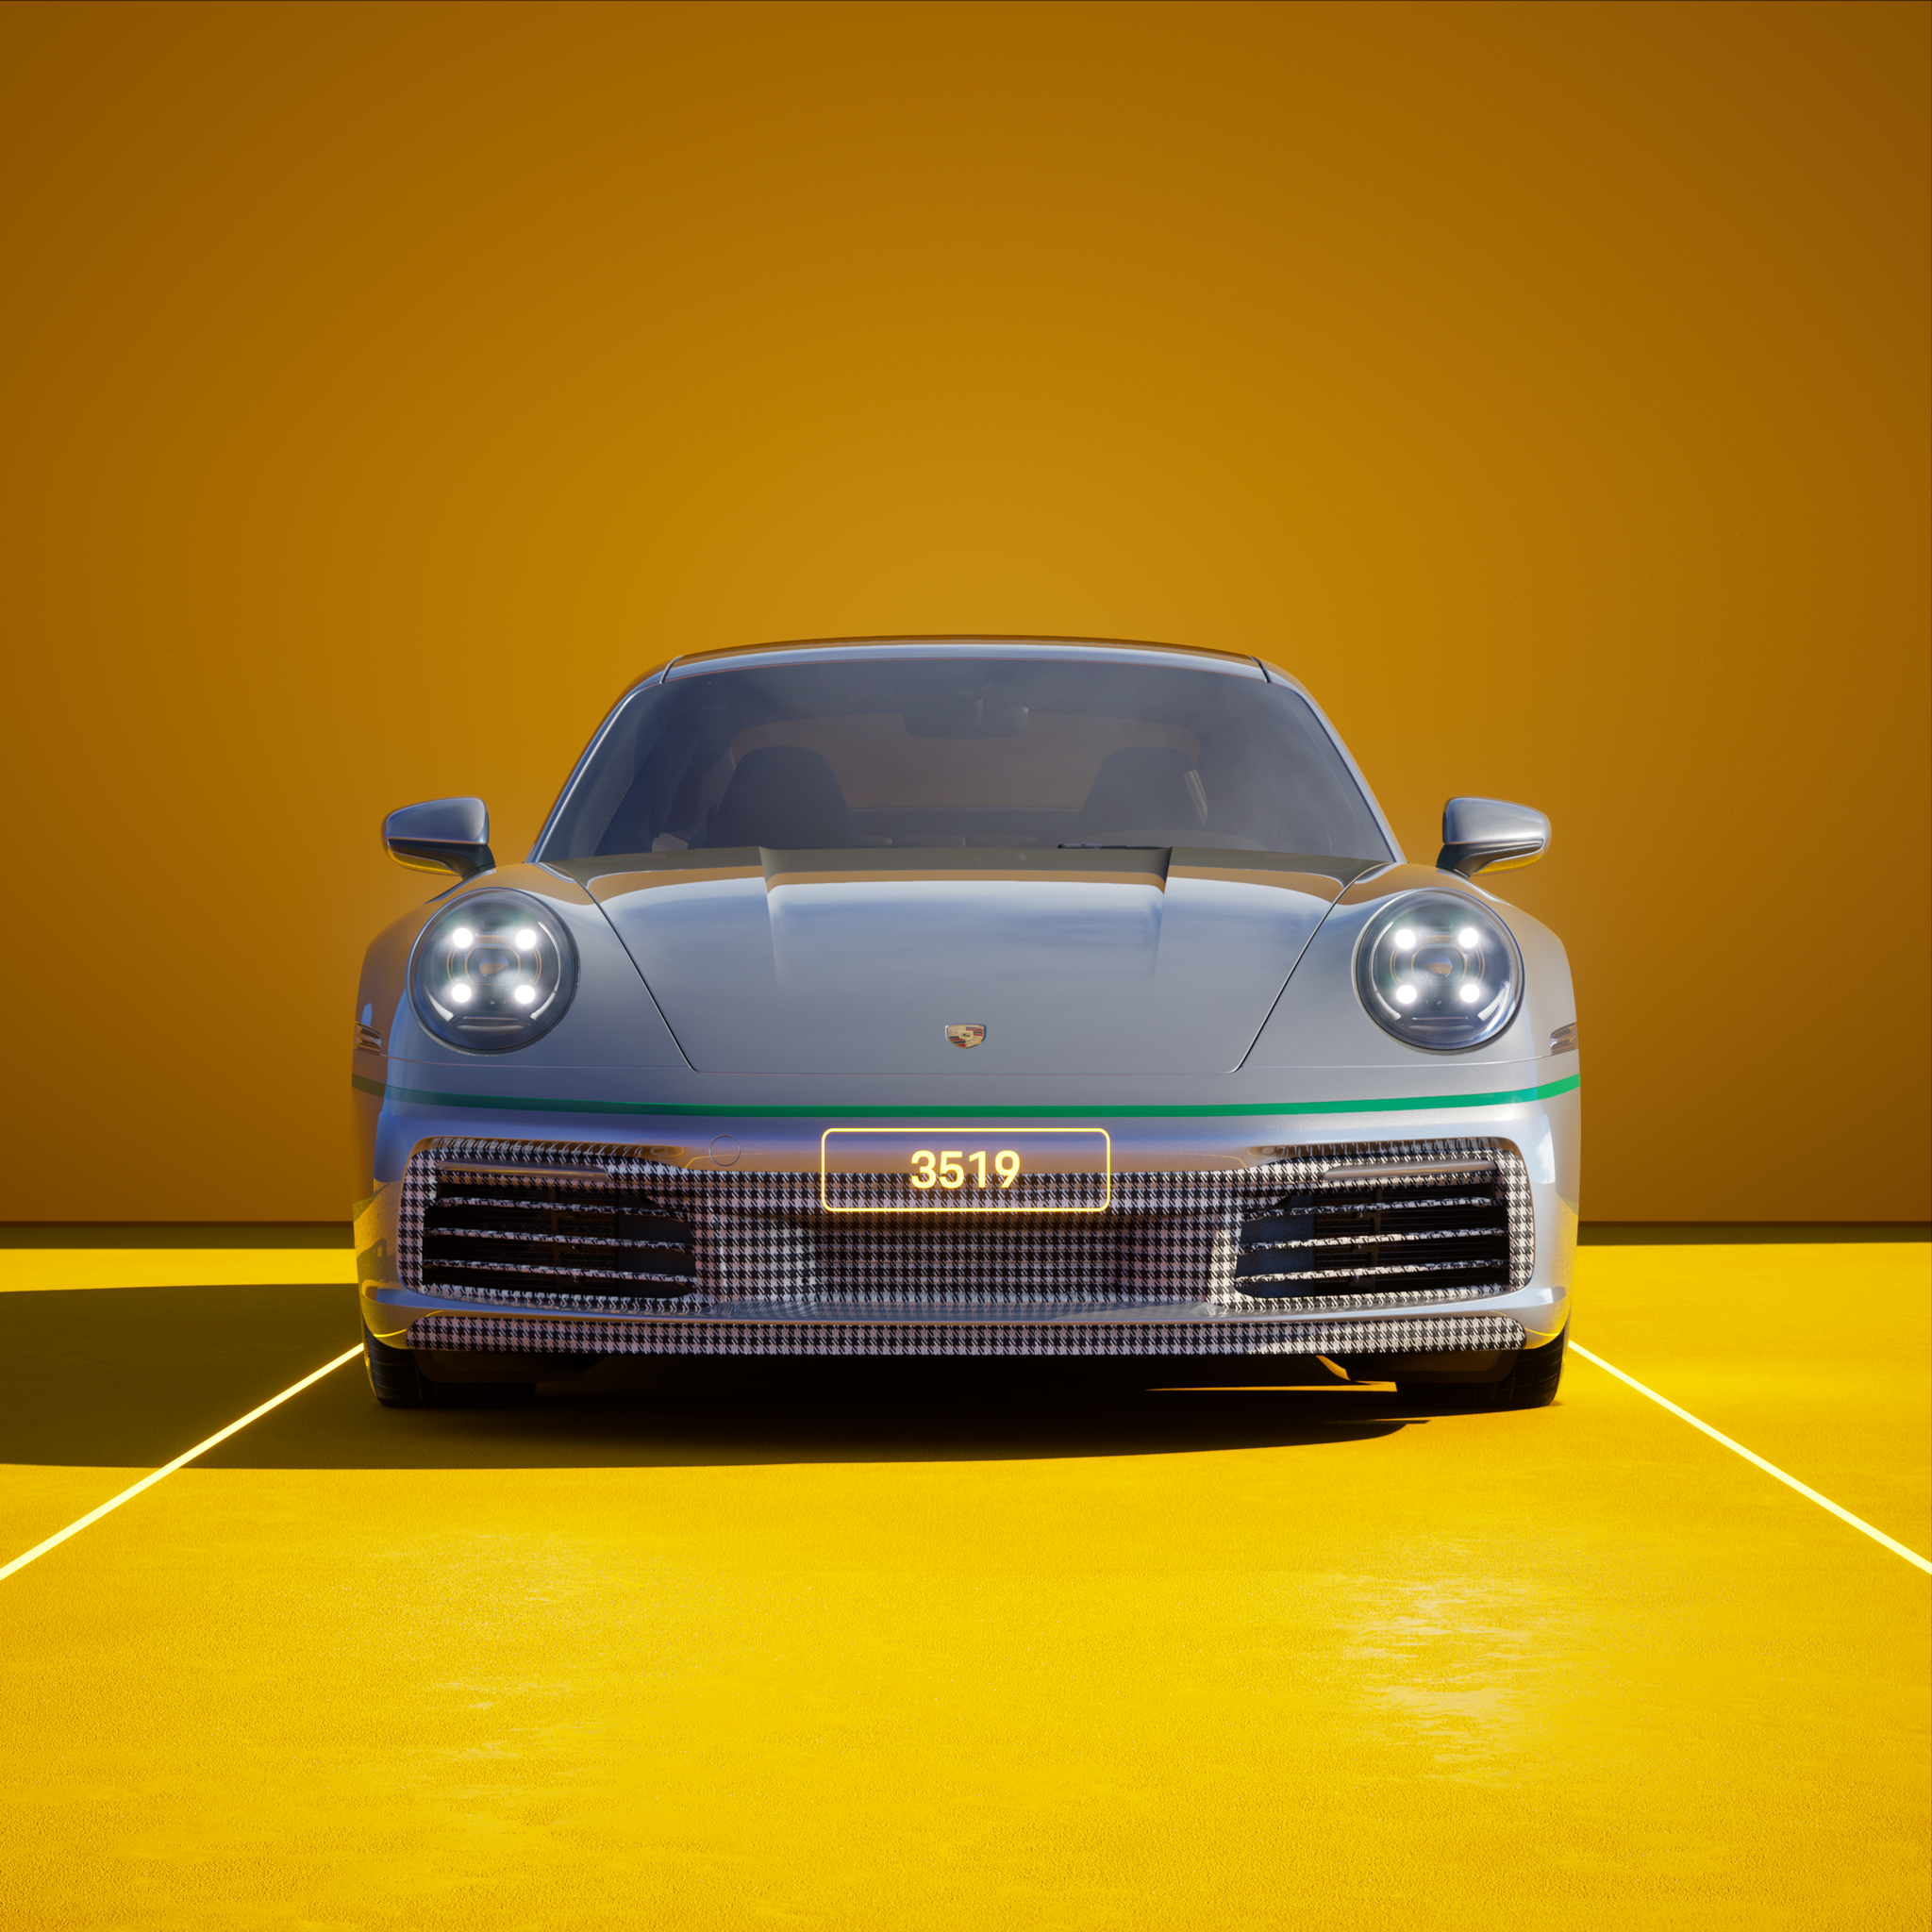 The PORSCHΞ 911 3519 image in phase